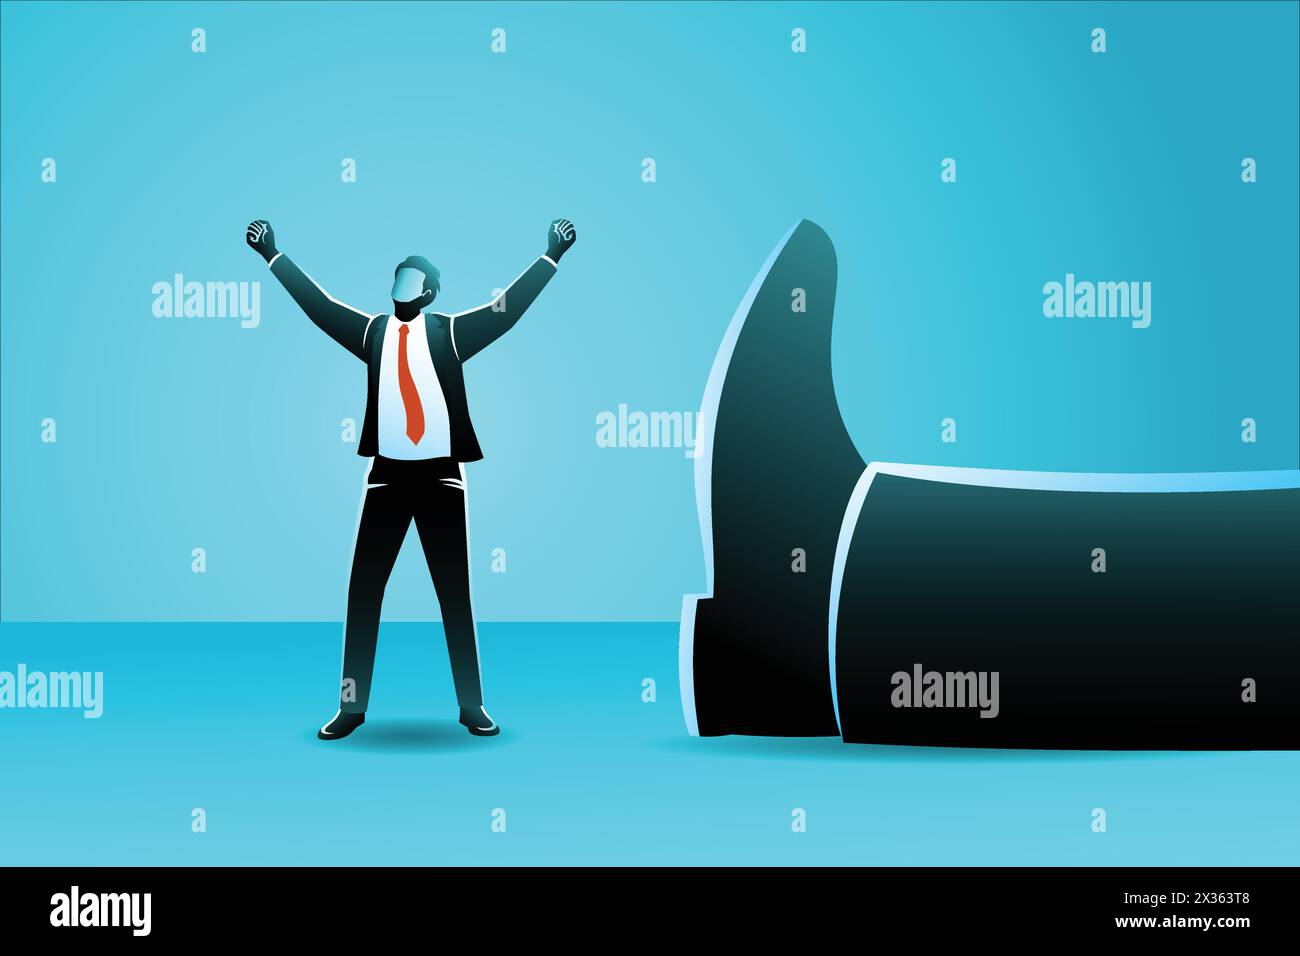 Vector illustration of business concept, a small businessman standing with his arms up near a giant leg lying near him Stock Vector